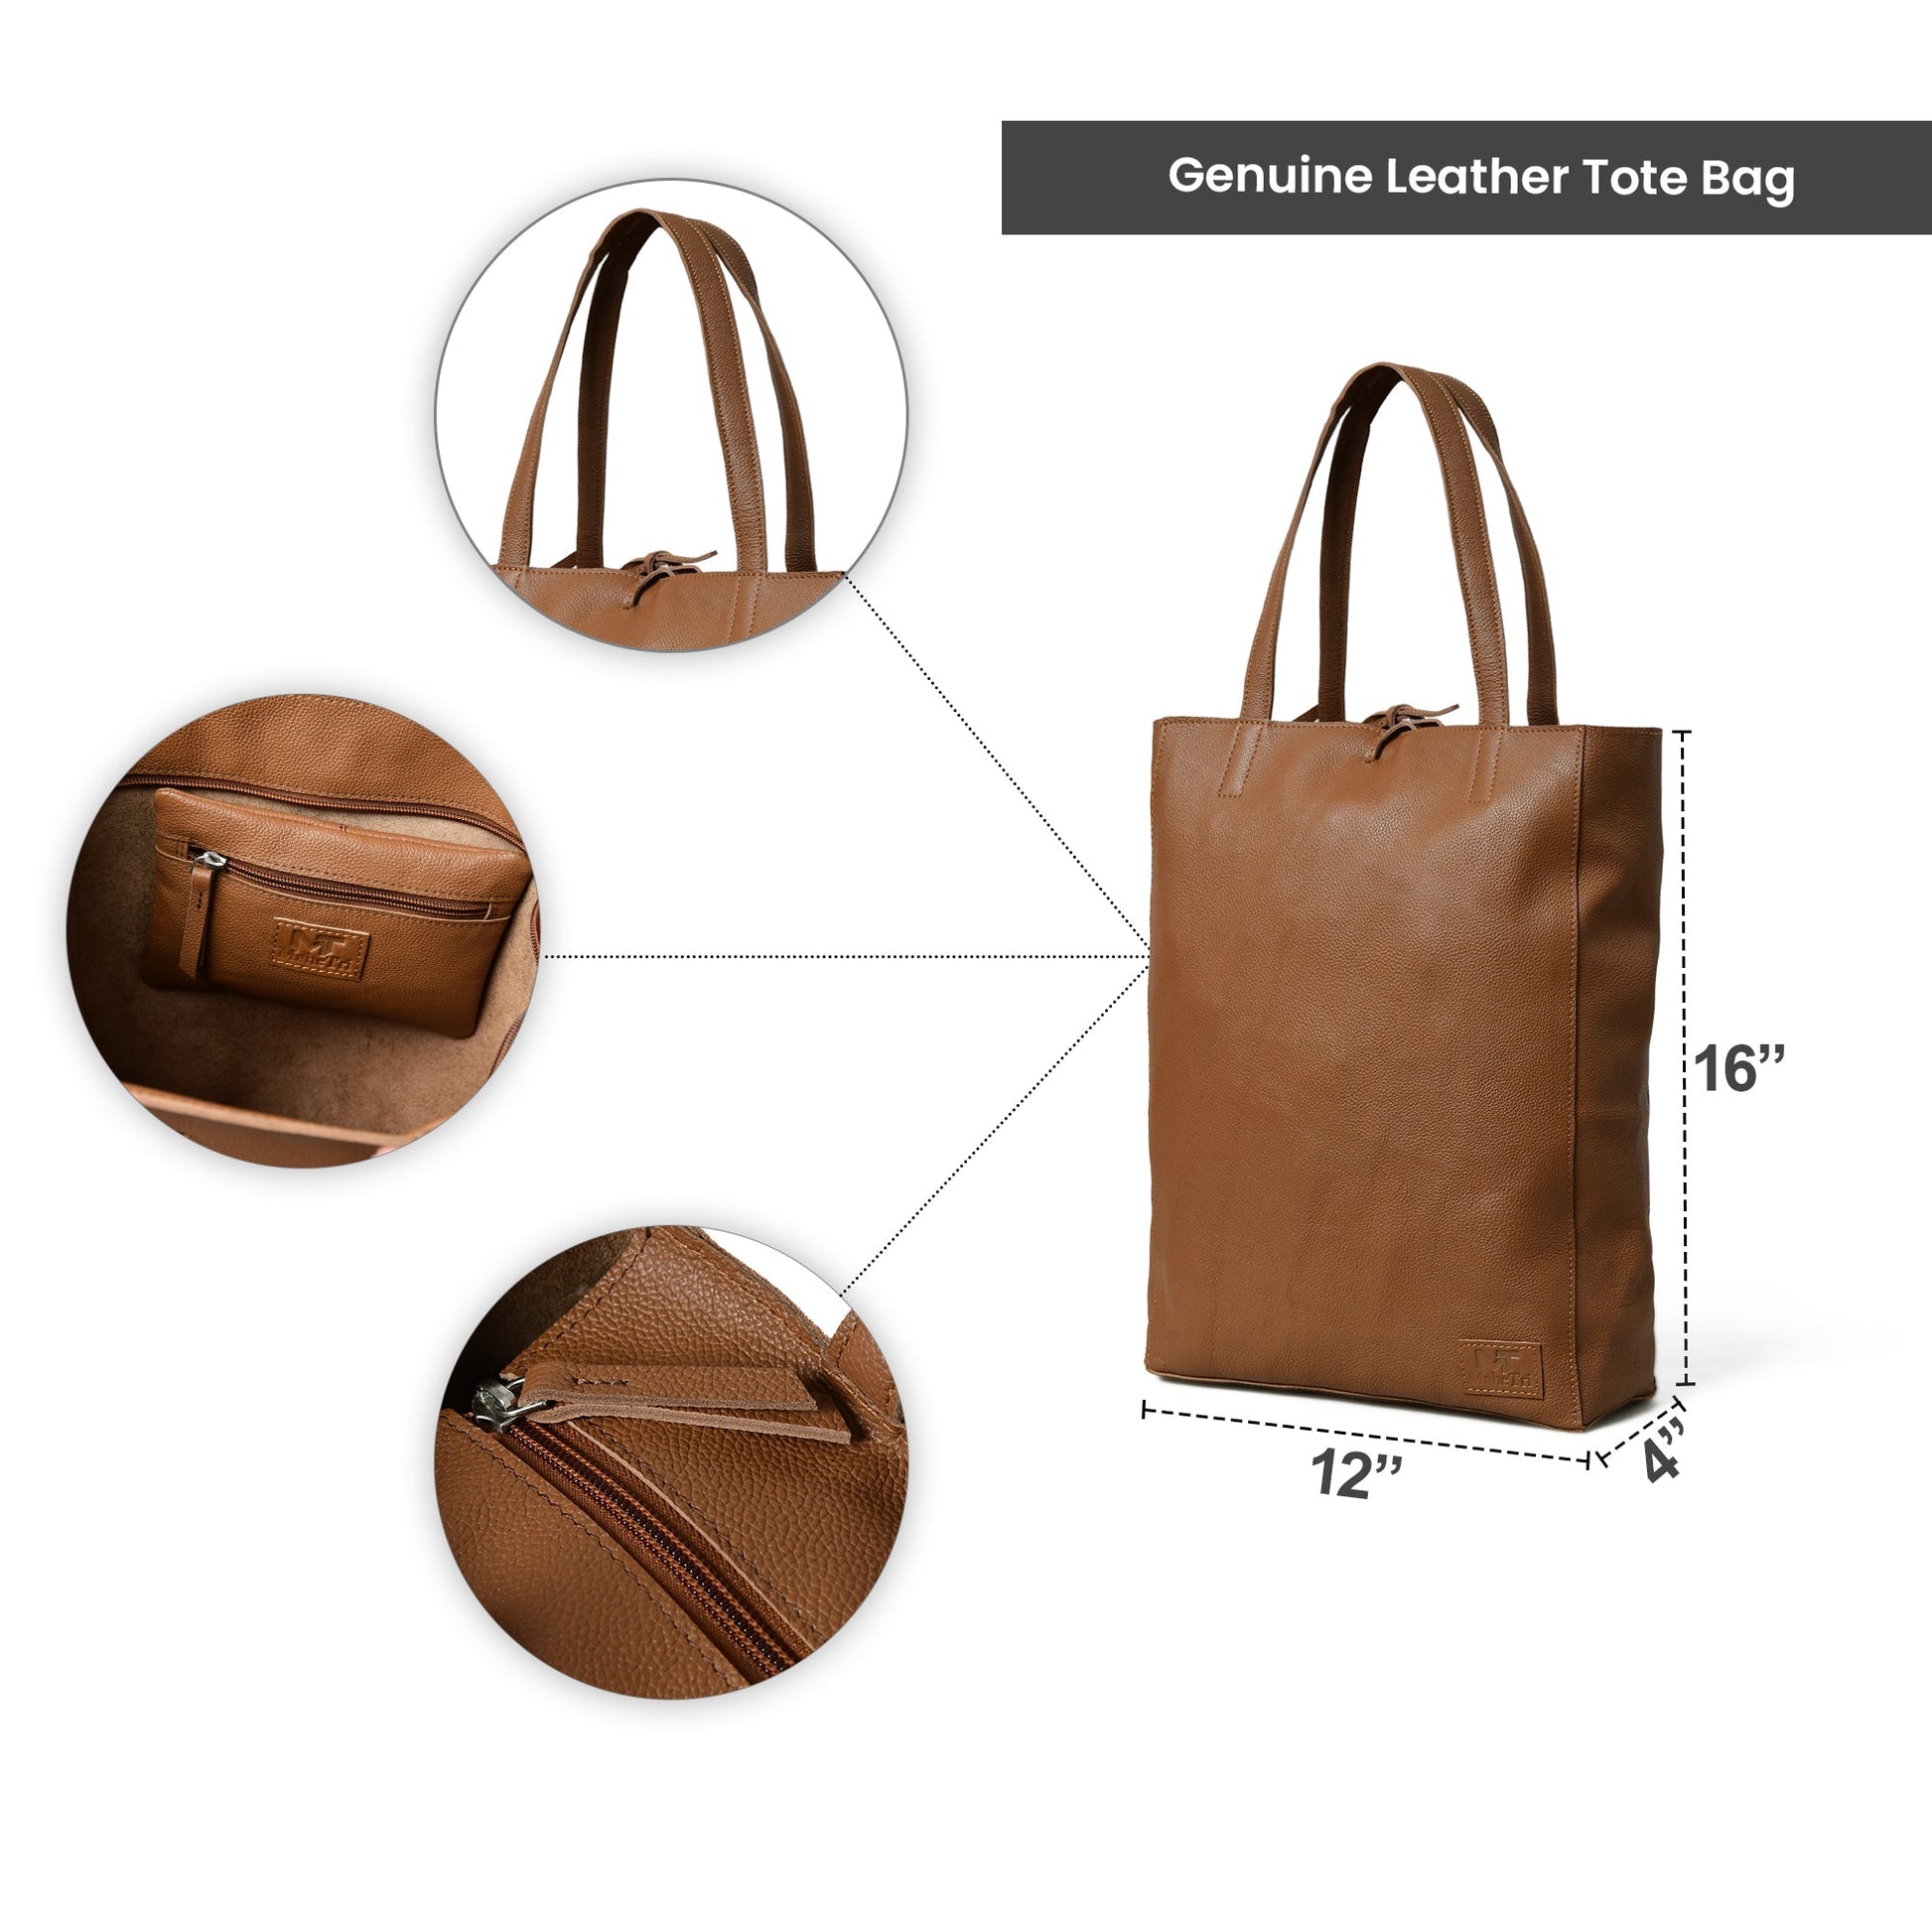 Café Chic Women's Leather Tote Bag - The Tool Store